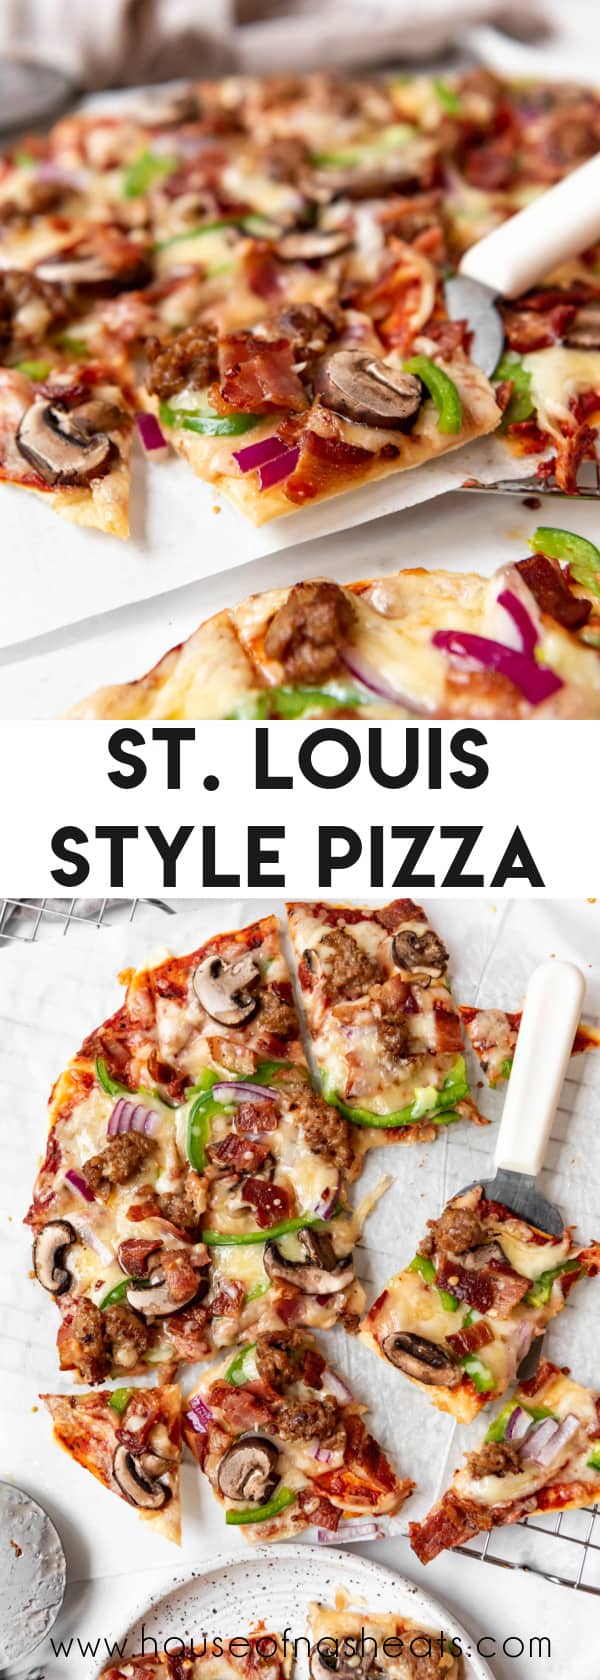 A collage of images of St. Louis style pizza with text overlay.